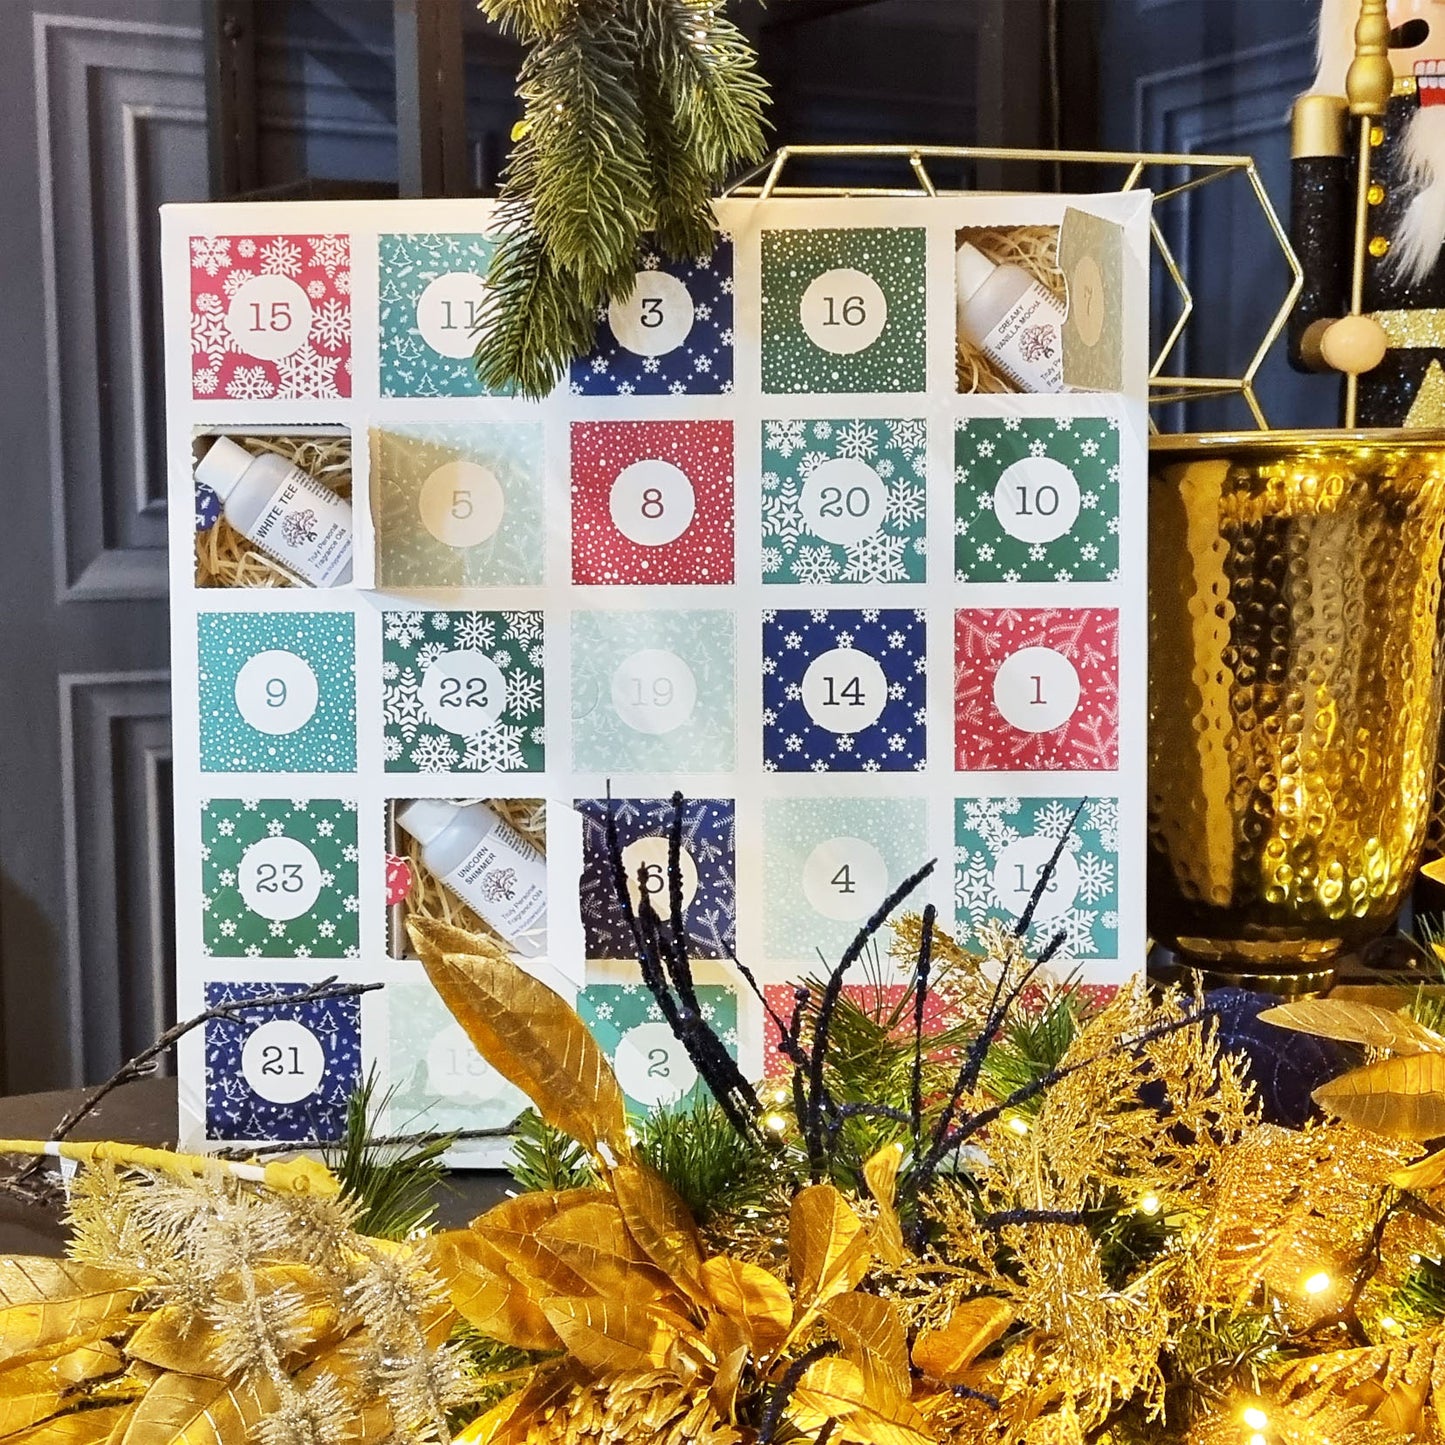 Fragrance Oil Advent Calendar | Truly Personal | Candles, Wax Melts